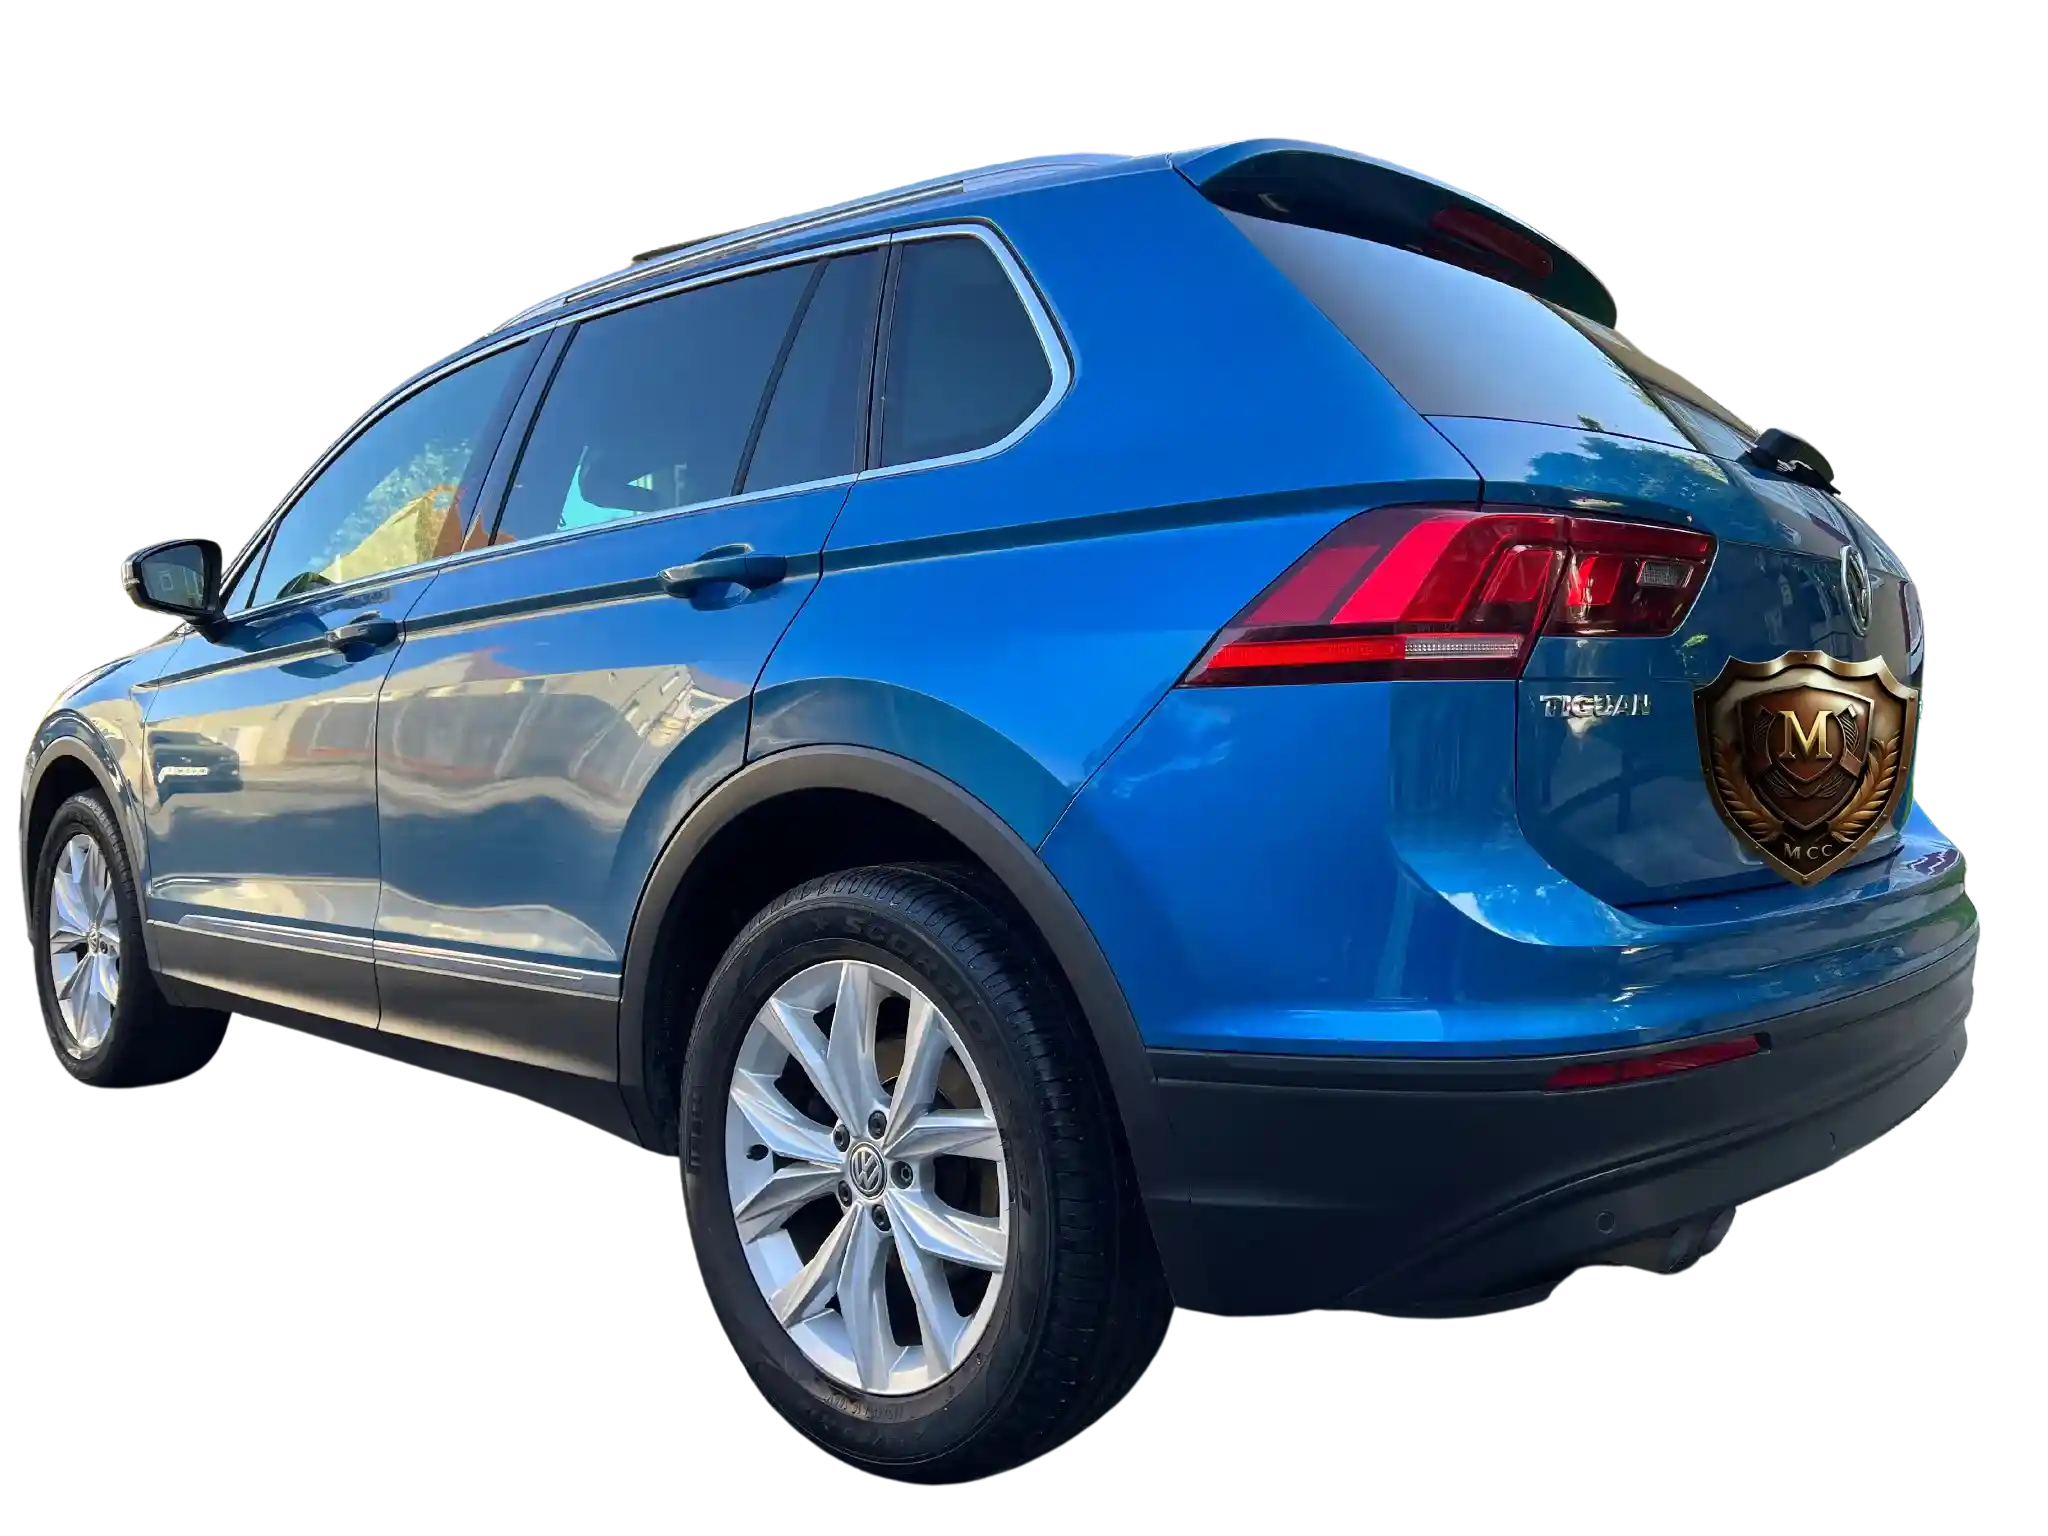 Eco-friendly waterless valeting of a Volkswagen Tiguan 4Motion in Leatherhead, enhancing its rugged elegance and reflecting corporate environmental values.